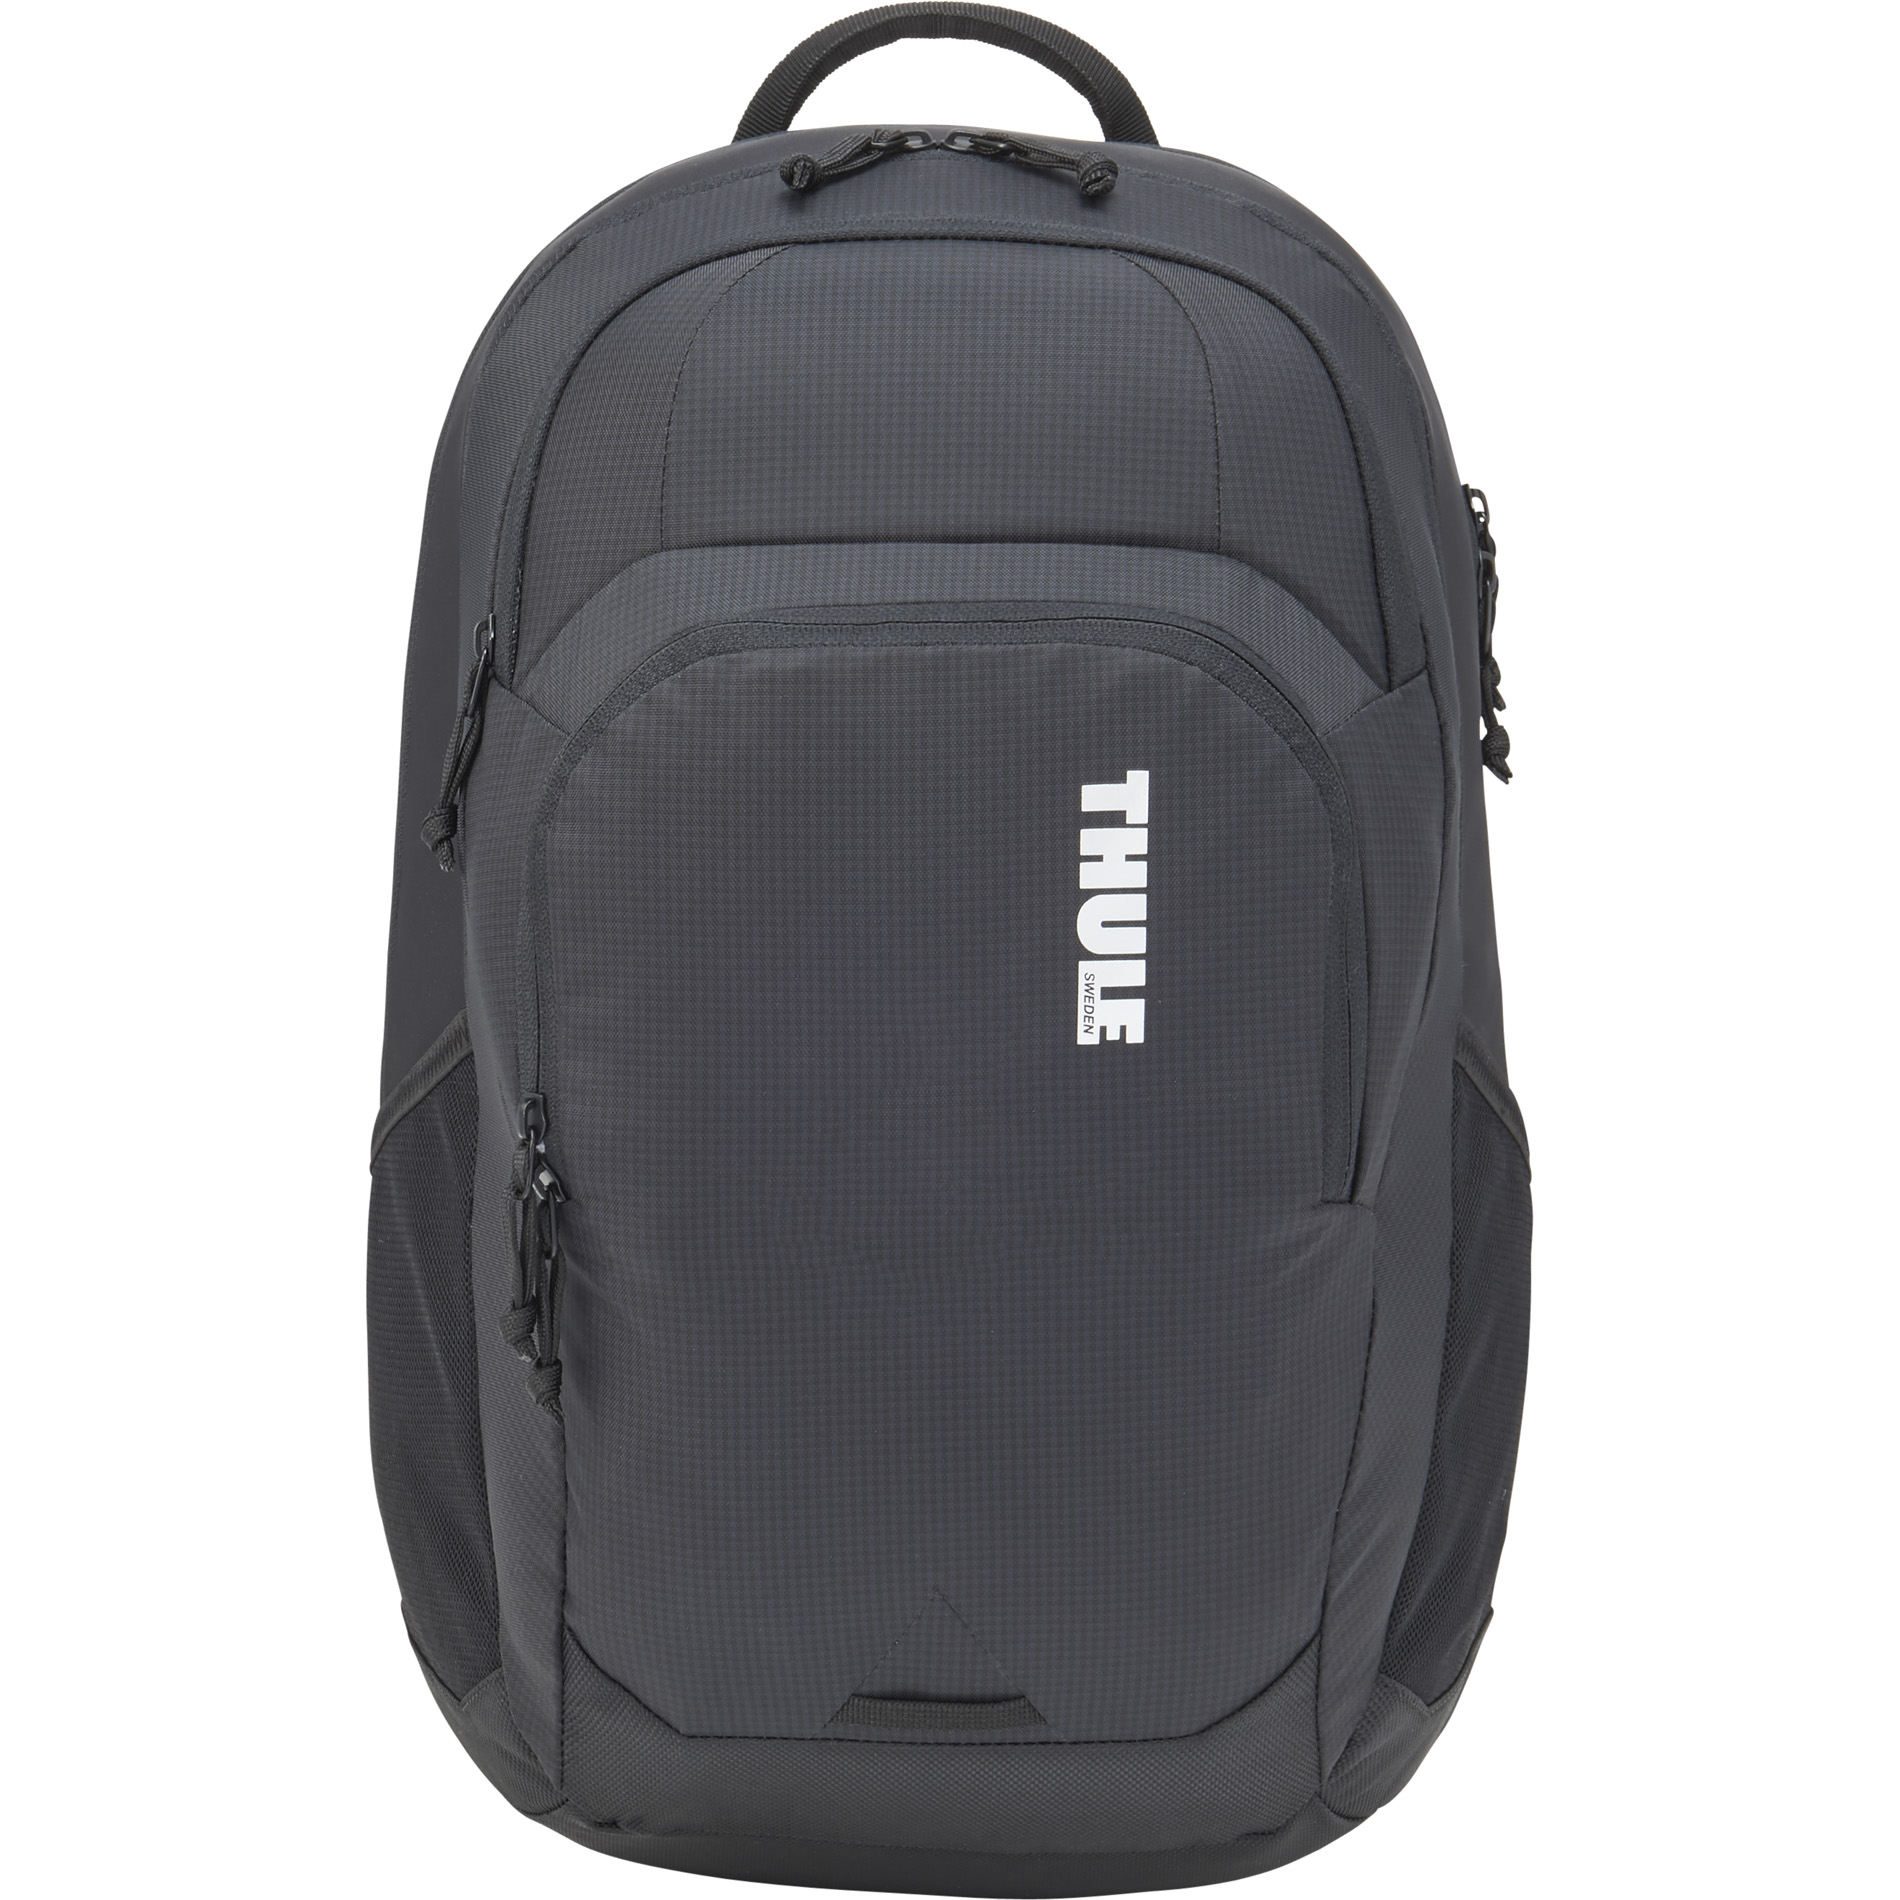 Thule 9020-37 - Chronical 15" Computer Backpack